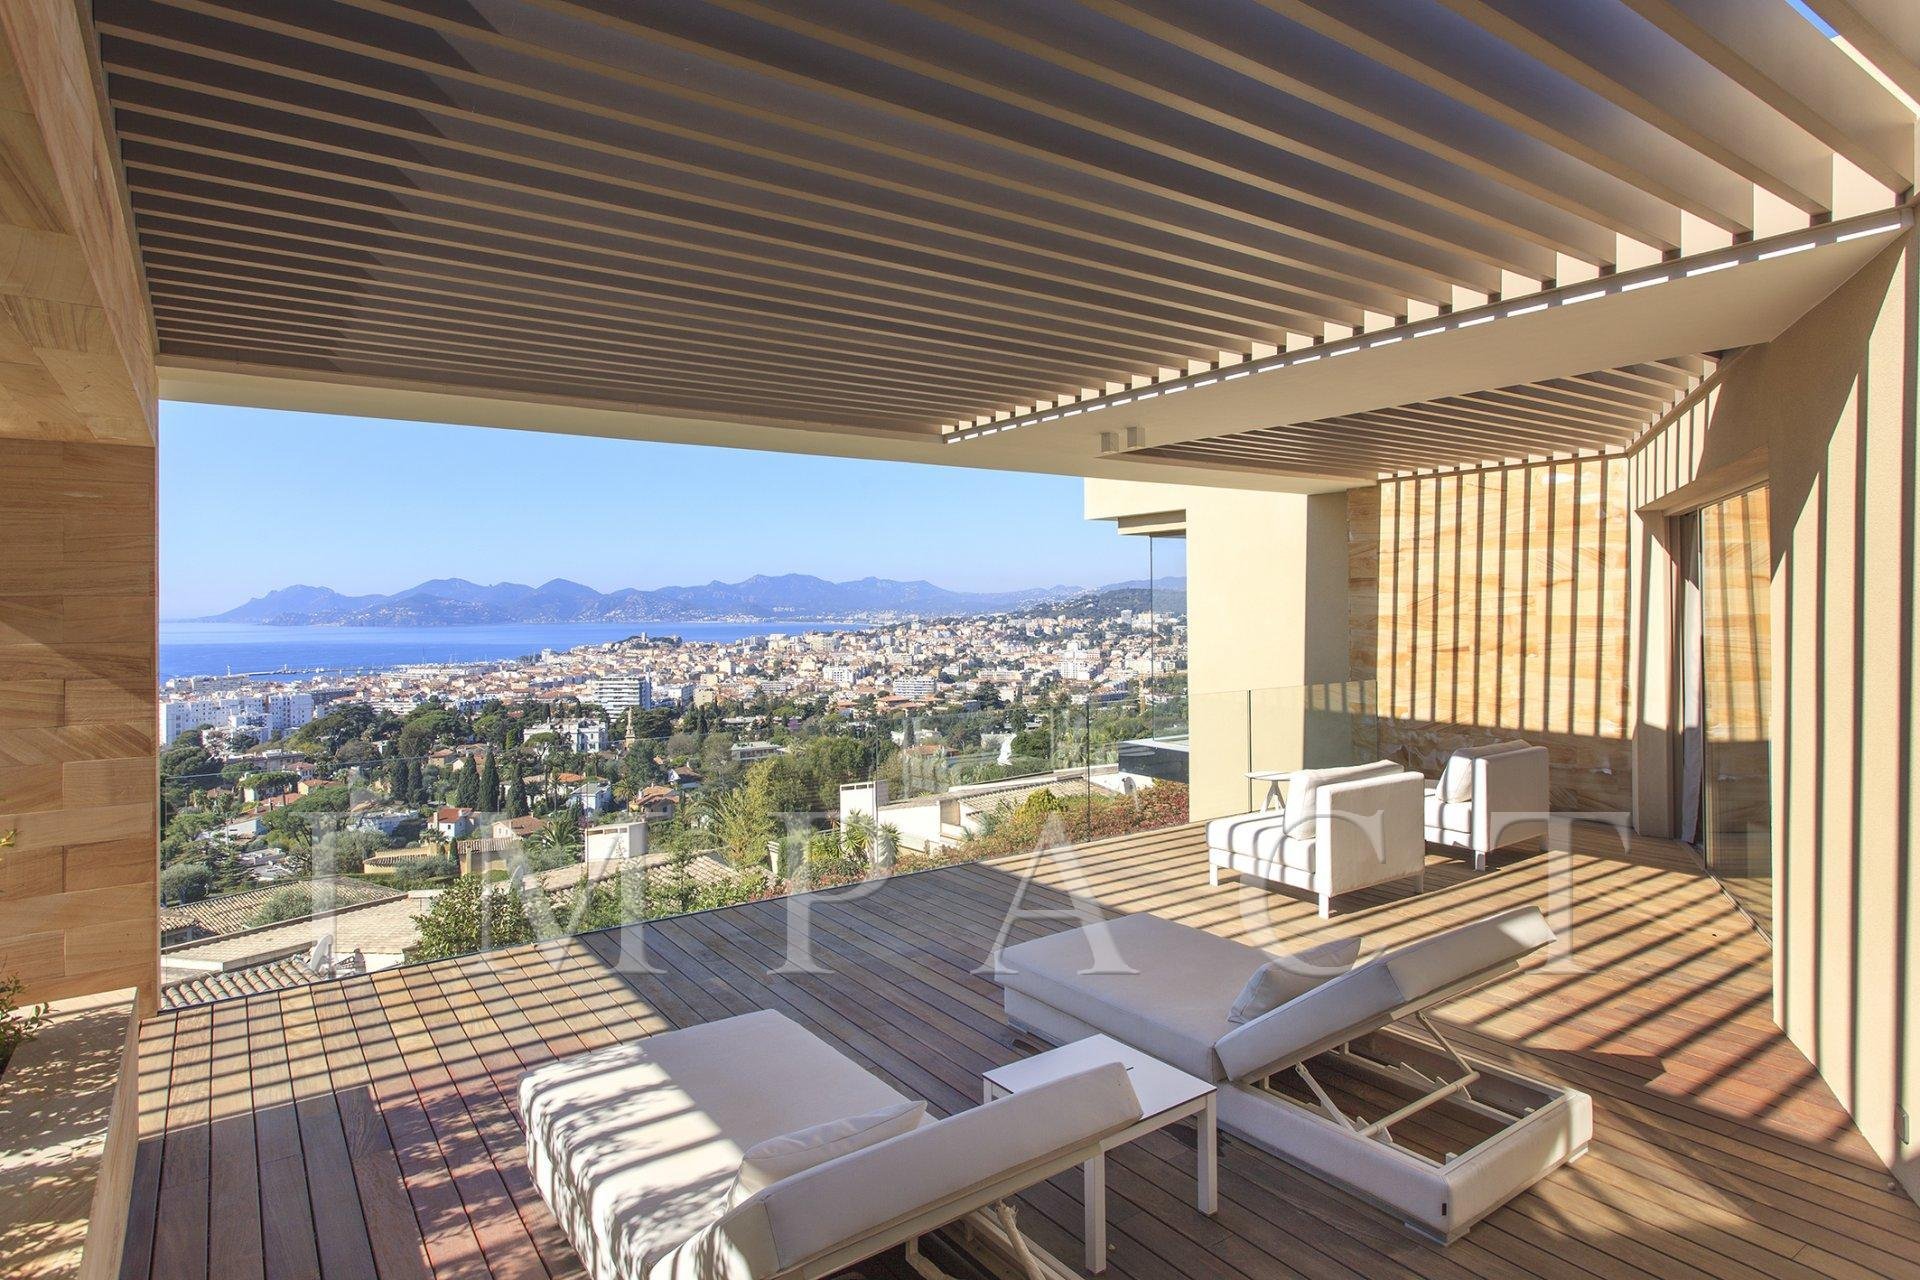 Beautiful conptemporary villa to rent in Cannes, "Basse Californie" district